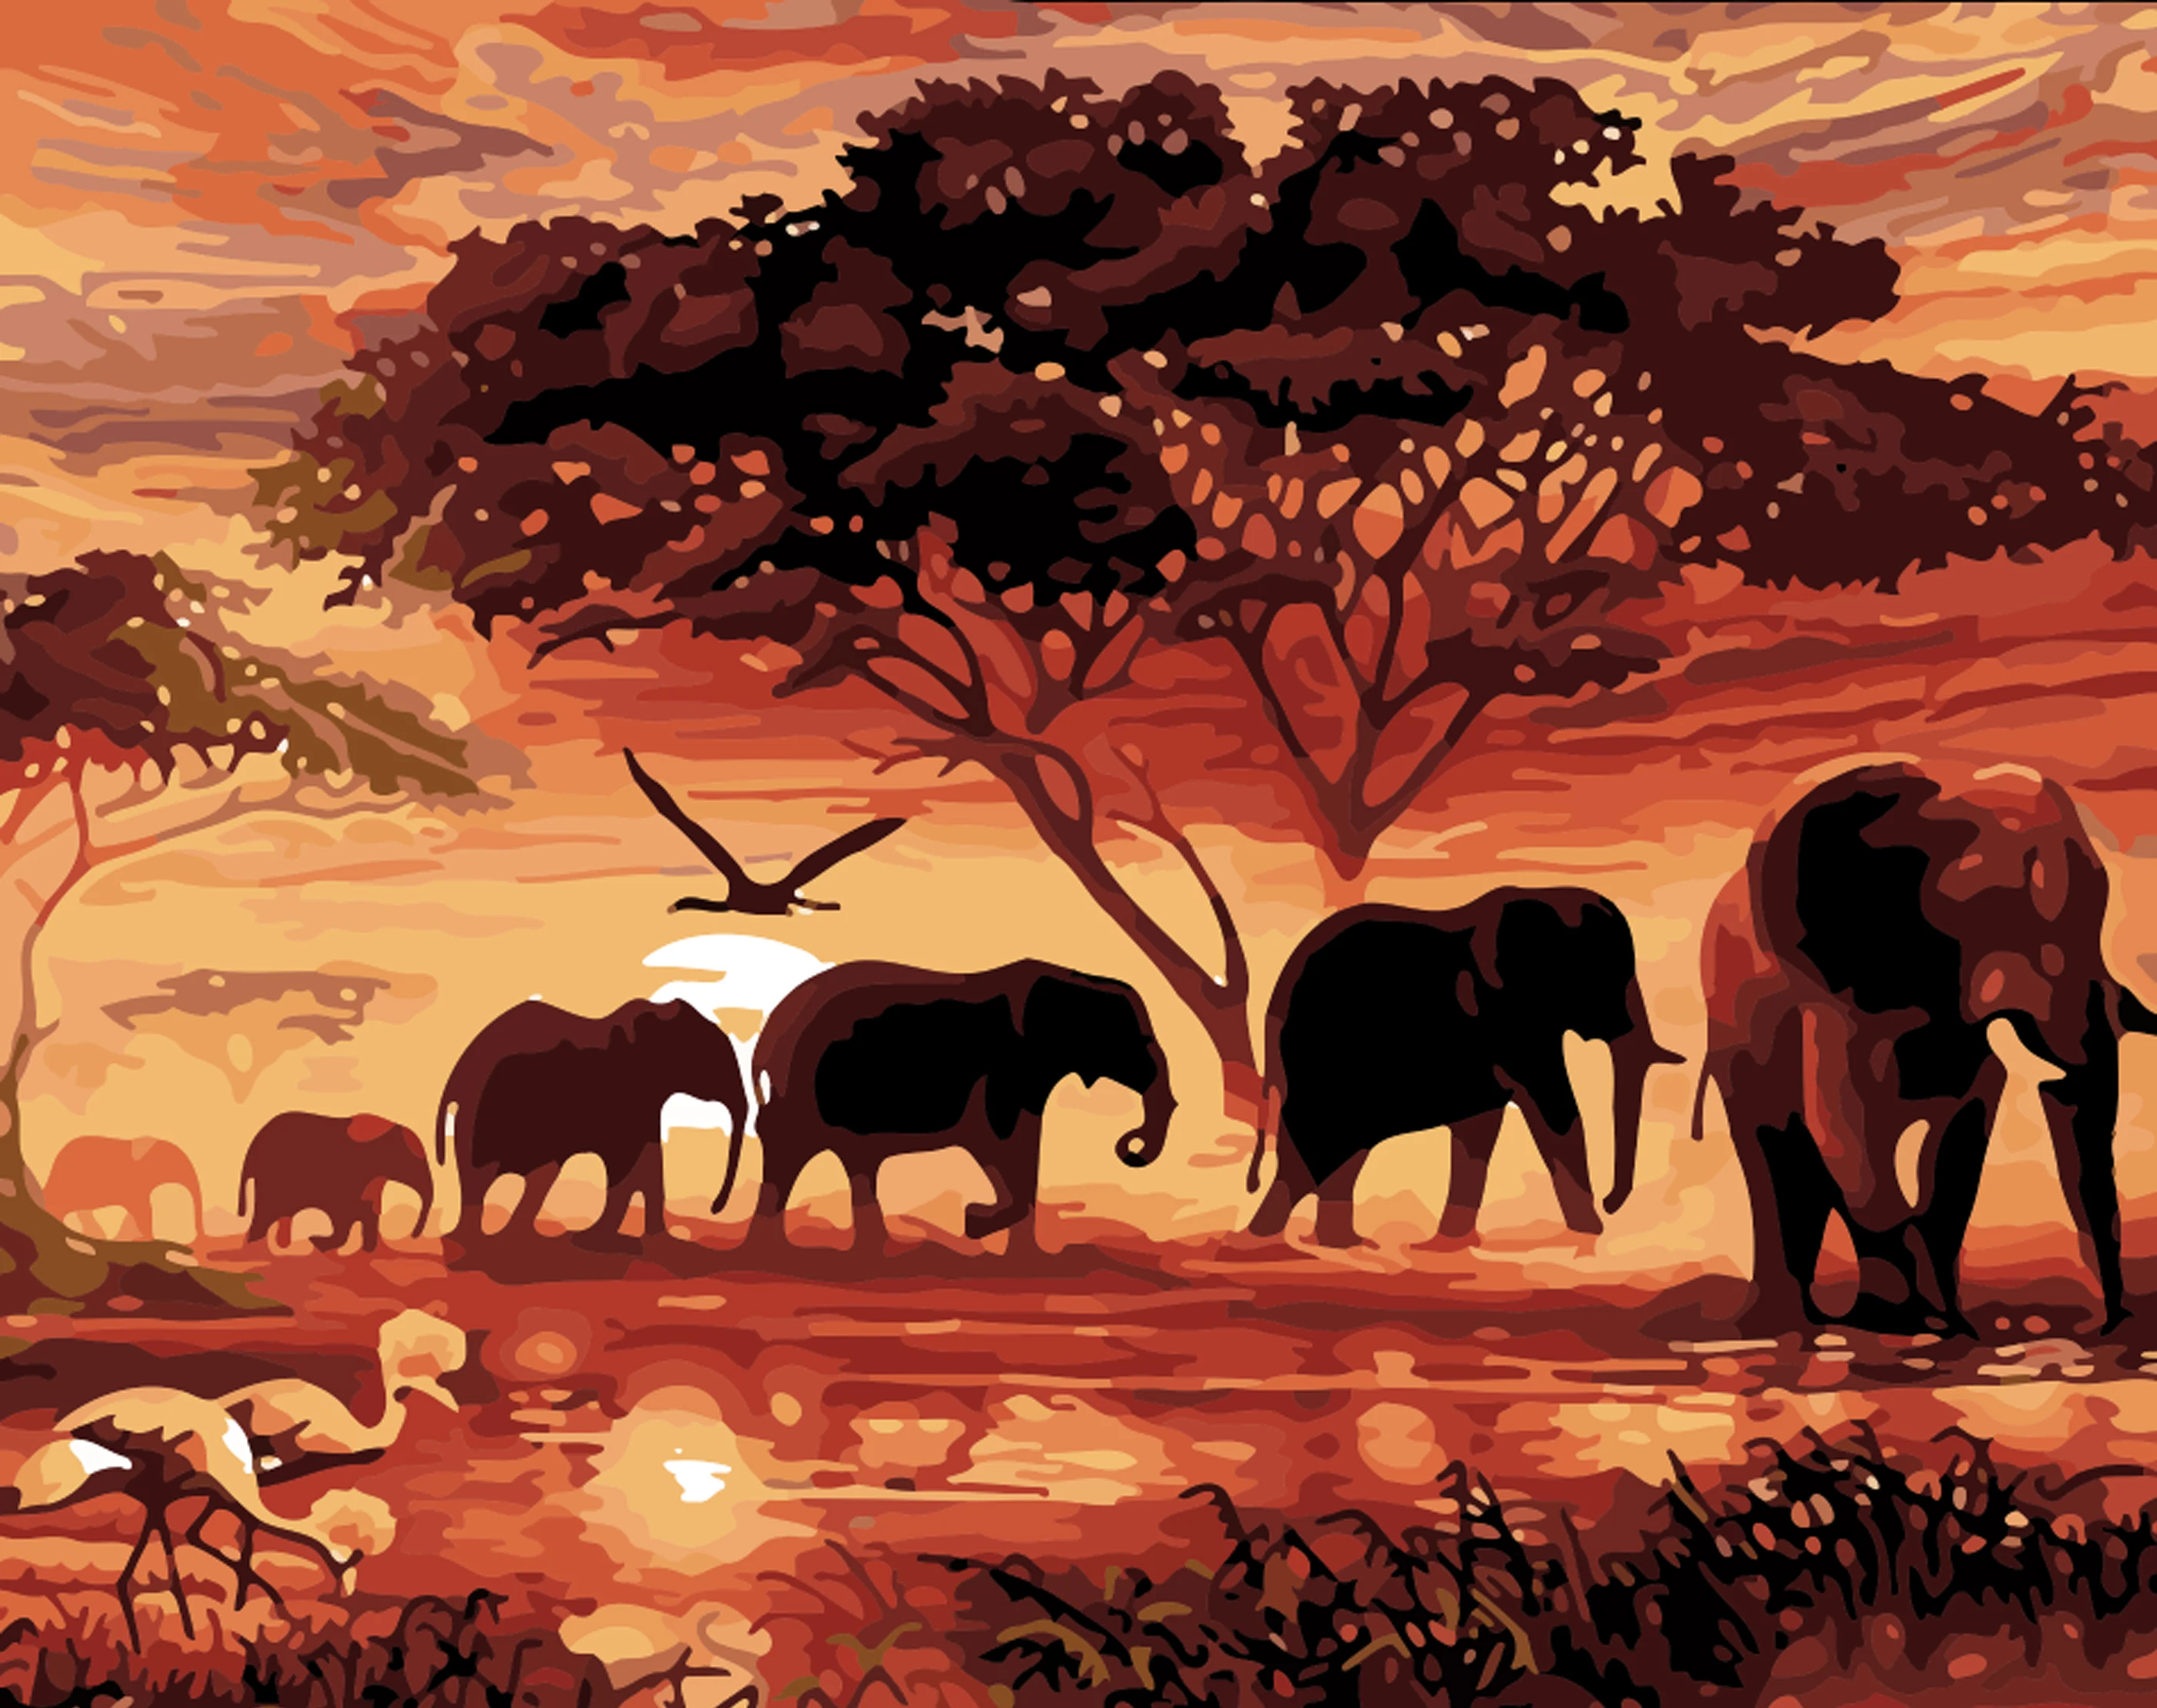 DIY 5D Sunset Elephant Diamond Painting by Number Kit for Adult  Full Drill Diamond Embroidery Dotz Kit Home Wall Decor 30x25cm